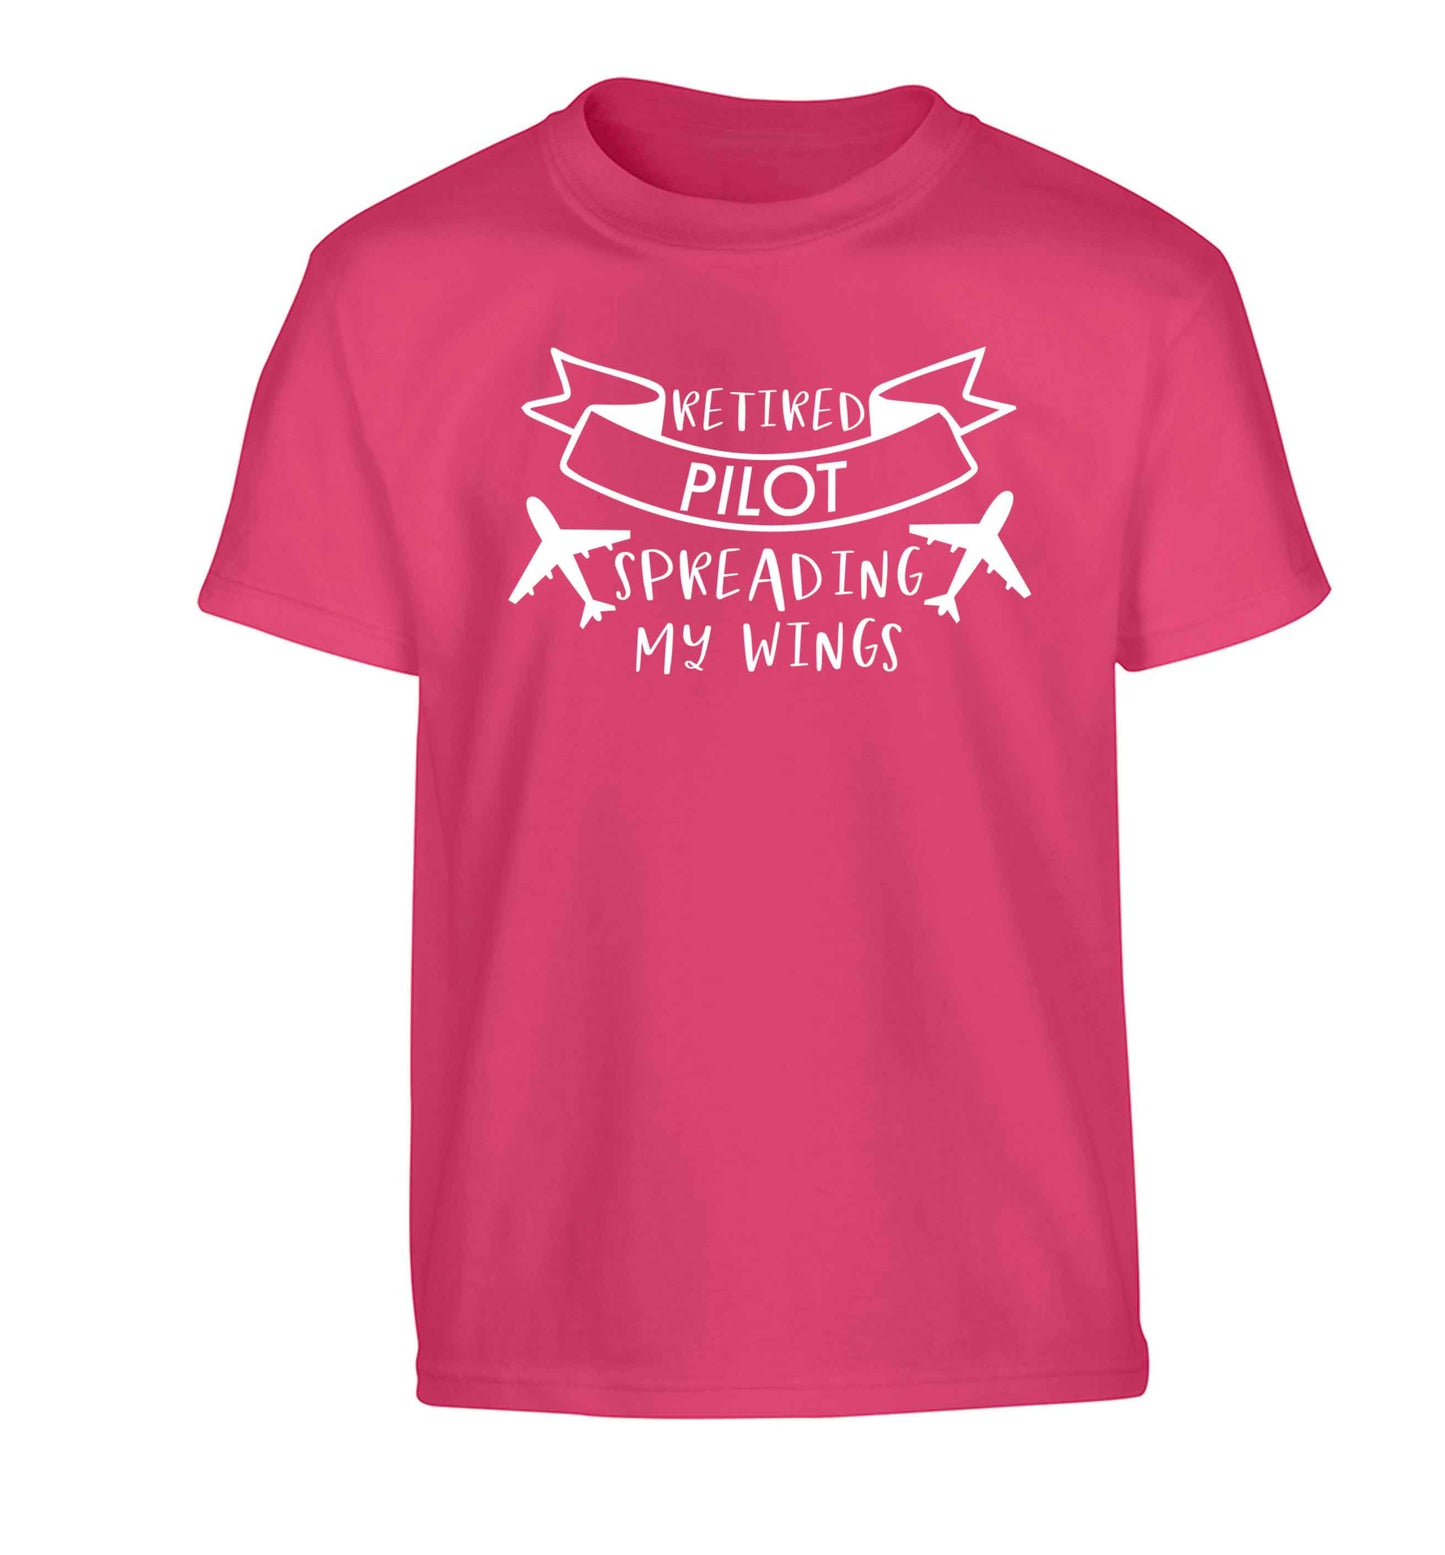 Retired pilot spreading my wings Children's pink Tshirt 12-13 Years